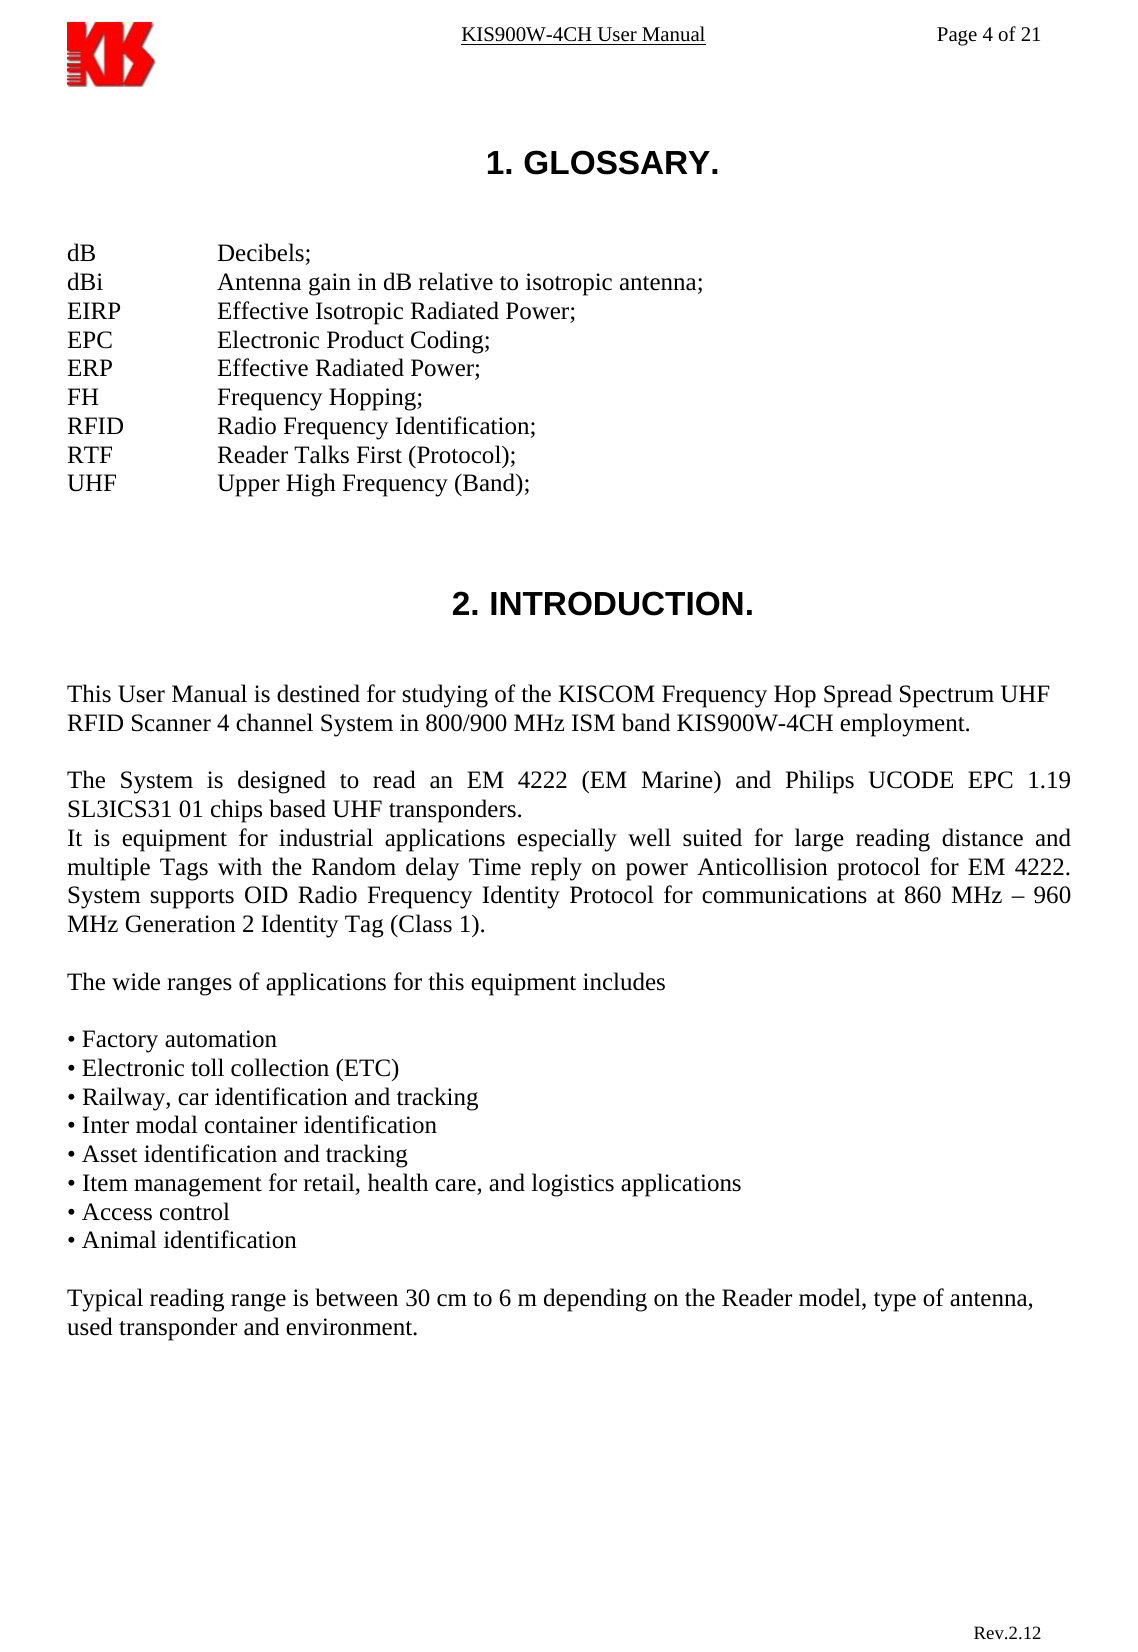 KIS900W-4CH User Manual           Page 4 of 21  1. GLOSSARY.   dB   Decibels; dBi    Antenna gain in dB relative to isotropic antenna; EIRP    Effective Isotropic Radiated Power; EPC    Electronic Product Coding; ERP    Effective Radiated Power; FH   Frequency Hopping; RFID    Radio Frequency Identification; RTF    Reader Talks First (Protocol); UHF    Upper High Frequency (Band);    2. INTRODUCTION.   This User Manual is destined for studying of the KISCOM Frequency Hop Spread Spectrum UHF RFID Scanner 4 channel System in 800/900 MHz ISM band KIS900W-4CH employment.  The System is designed to read an EM 4222 (EM Marine) and Philips UCODE EPC 1.19 SL3ICS31 01 chips based UHF transponders. It is equipment for industrial applications especially well suited for large reading distance and multiple Tags with the Random delay Time reply on power Anticollision protocol for EM 4222. System supports OID Radio Frequency Identity Protocol for communications at 860 MHz – 960 MHz Generation 2 Identity Tag (Class 1).  The wide ranges of applications for this equipment includes  • Factory automation • Electronic toll collection (ETC) • Railway, car identification and tracking • Inter modal container identification • Asset identification and tracking • Item management for retail, health care, and logistics applications • Access control • Animal identification  Typical reading range is between 30 cm to 6 m depending on the Reader model, type of antenna, used transponder and environment.                            Rev.2.12  